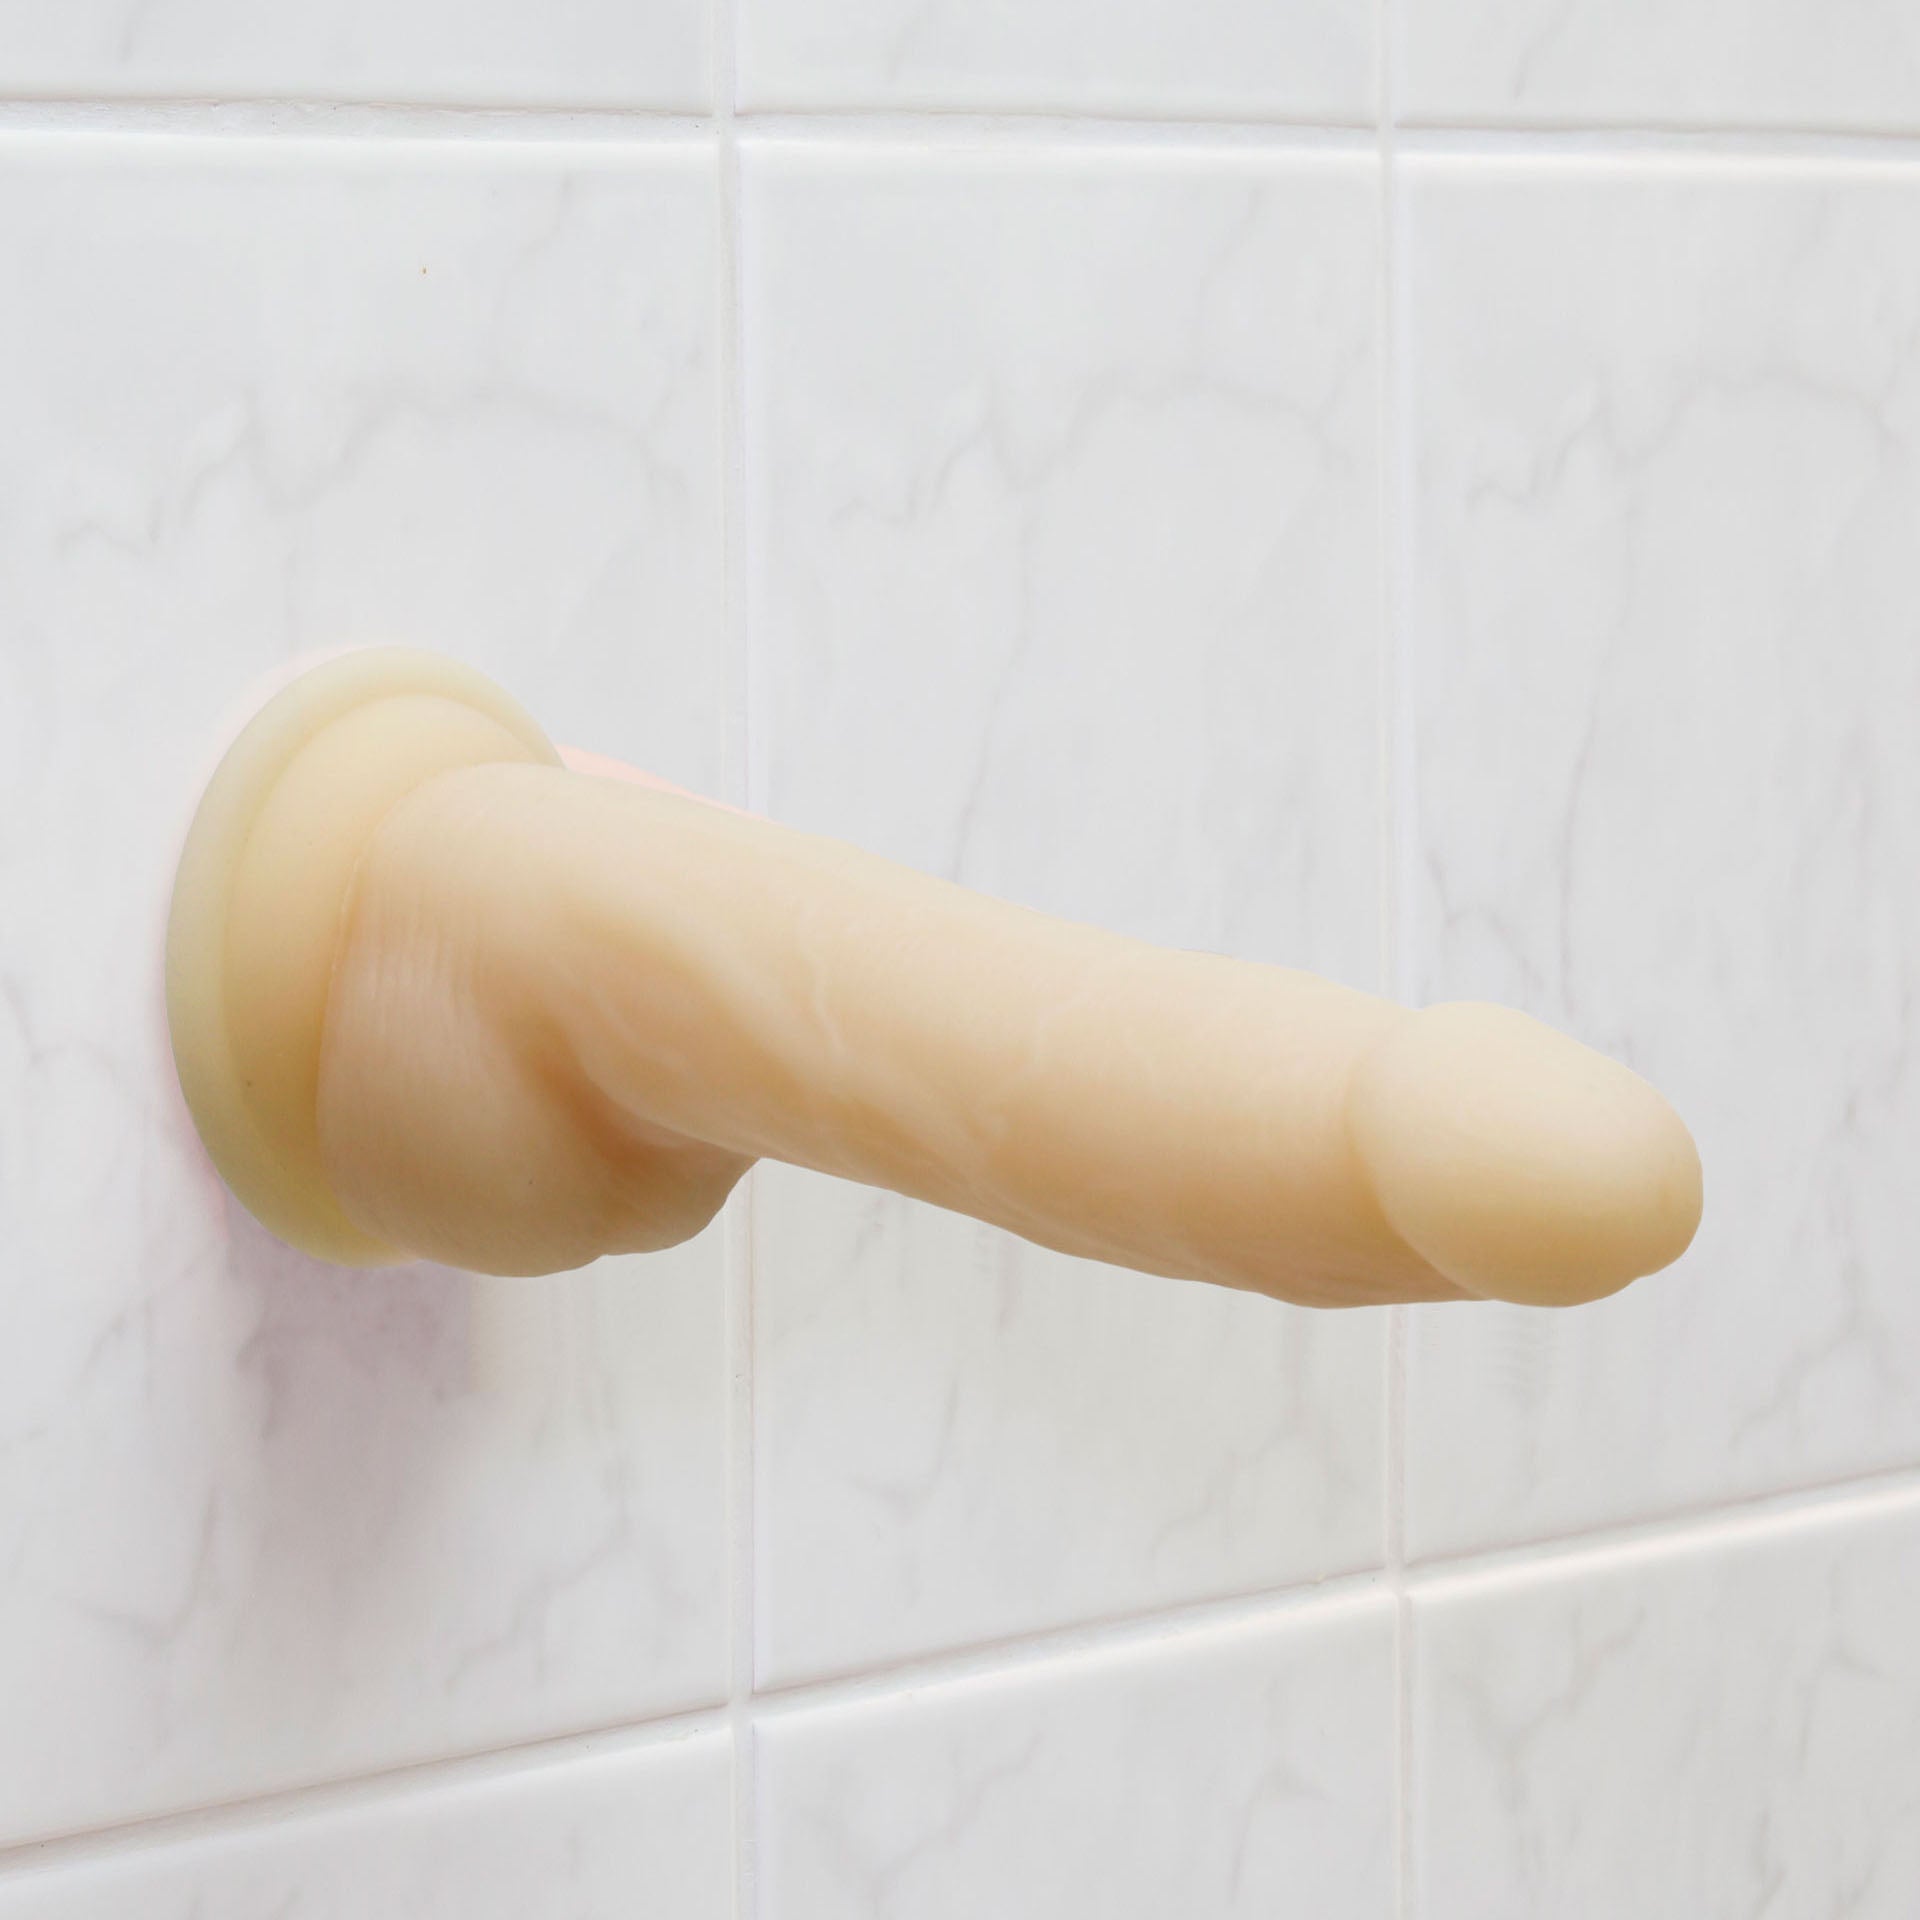 Naked Addiction 7 Inch Rotating and Vibrating Dong > Realistic Dildos and Vibes > Realistic Vibrators 7 Inches, Female, NEWLY-IMPORTED, Realistic Vibrators, Silicone - So Luxe Lingerie